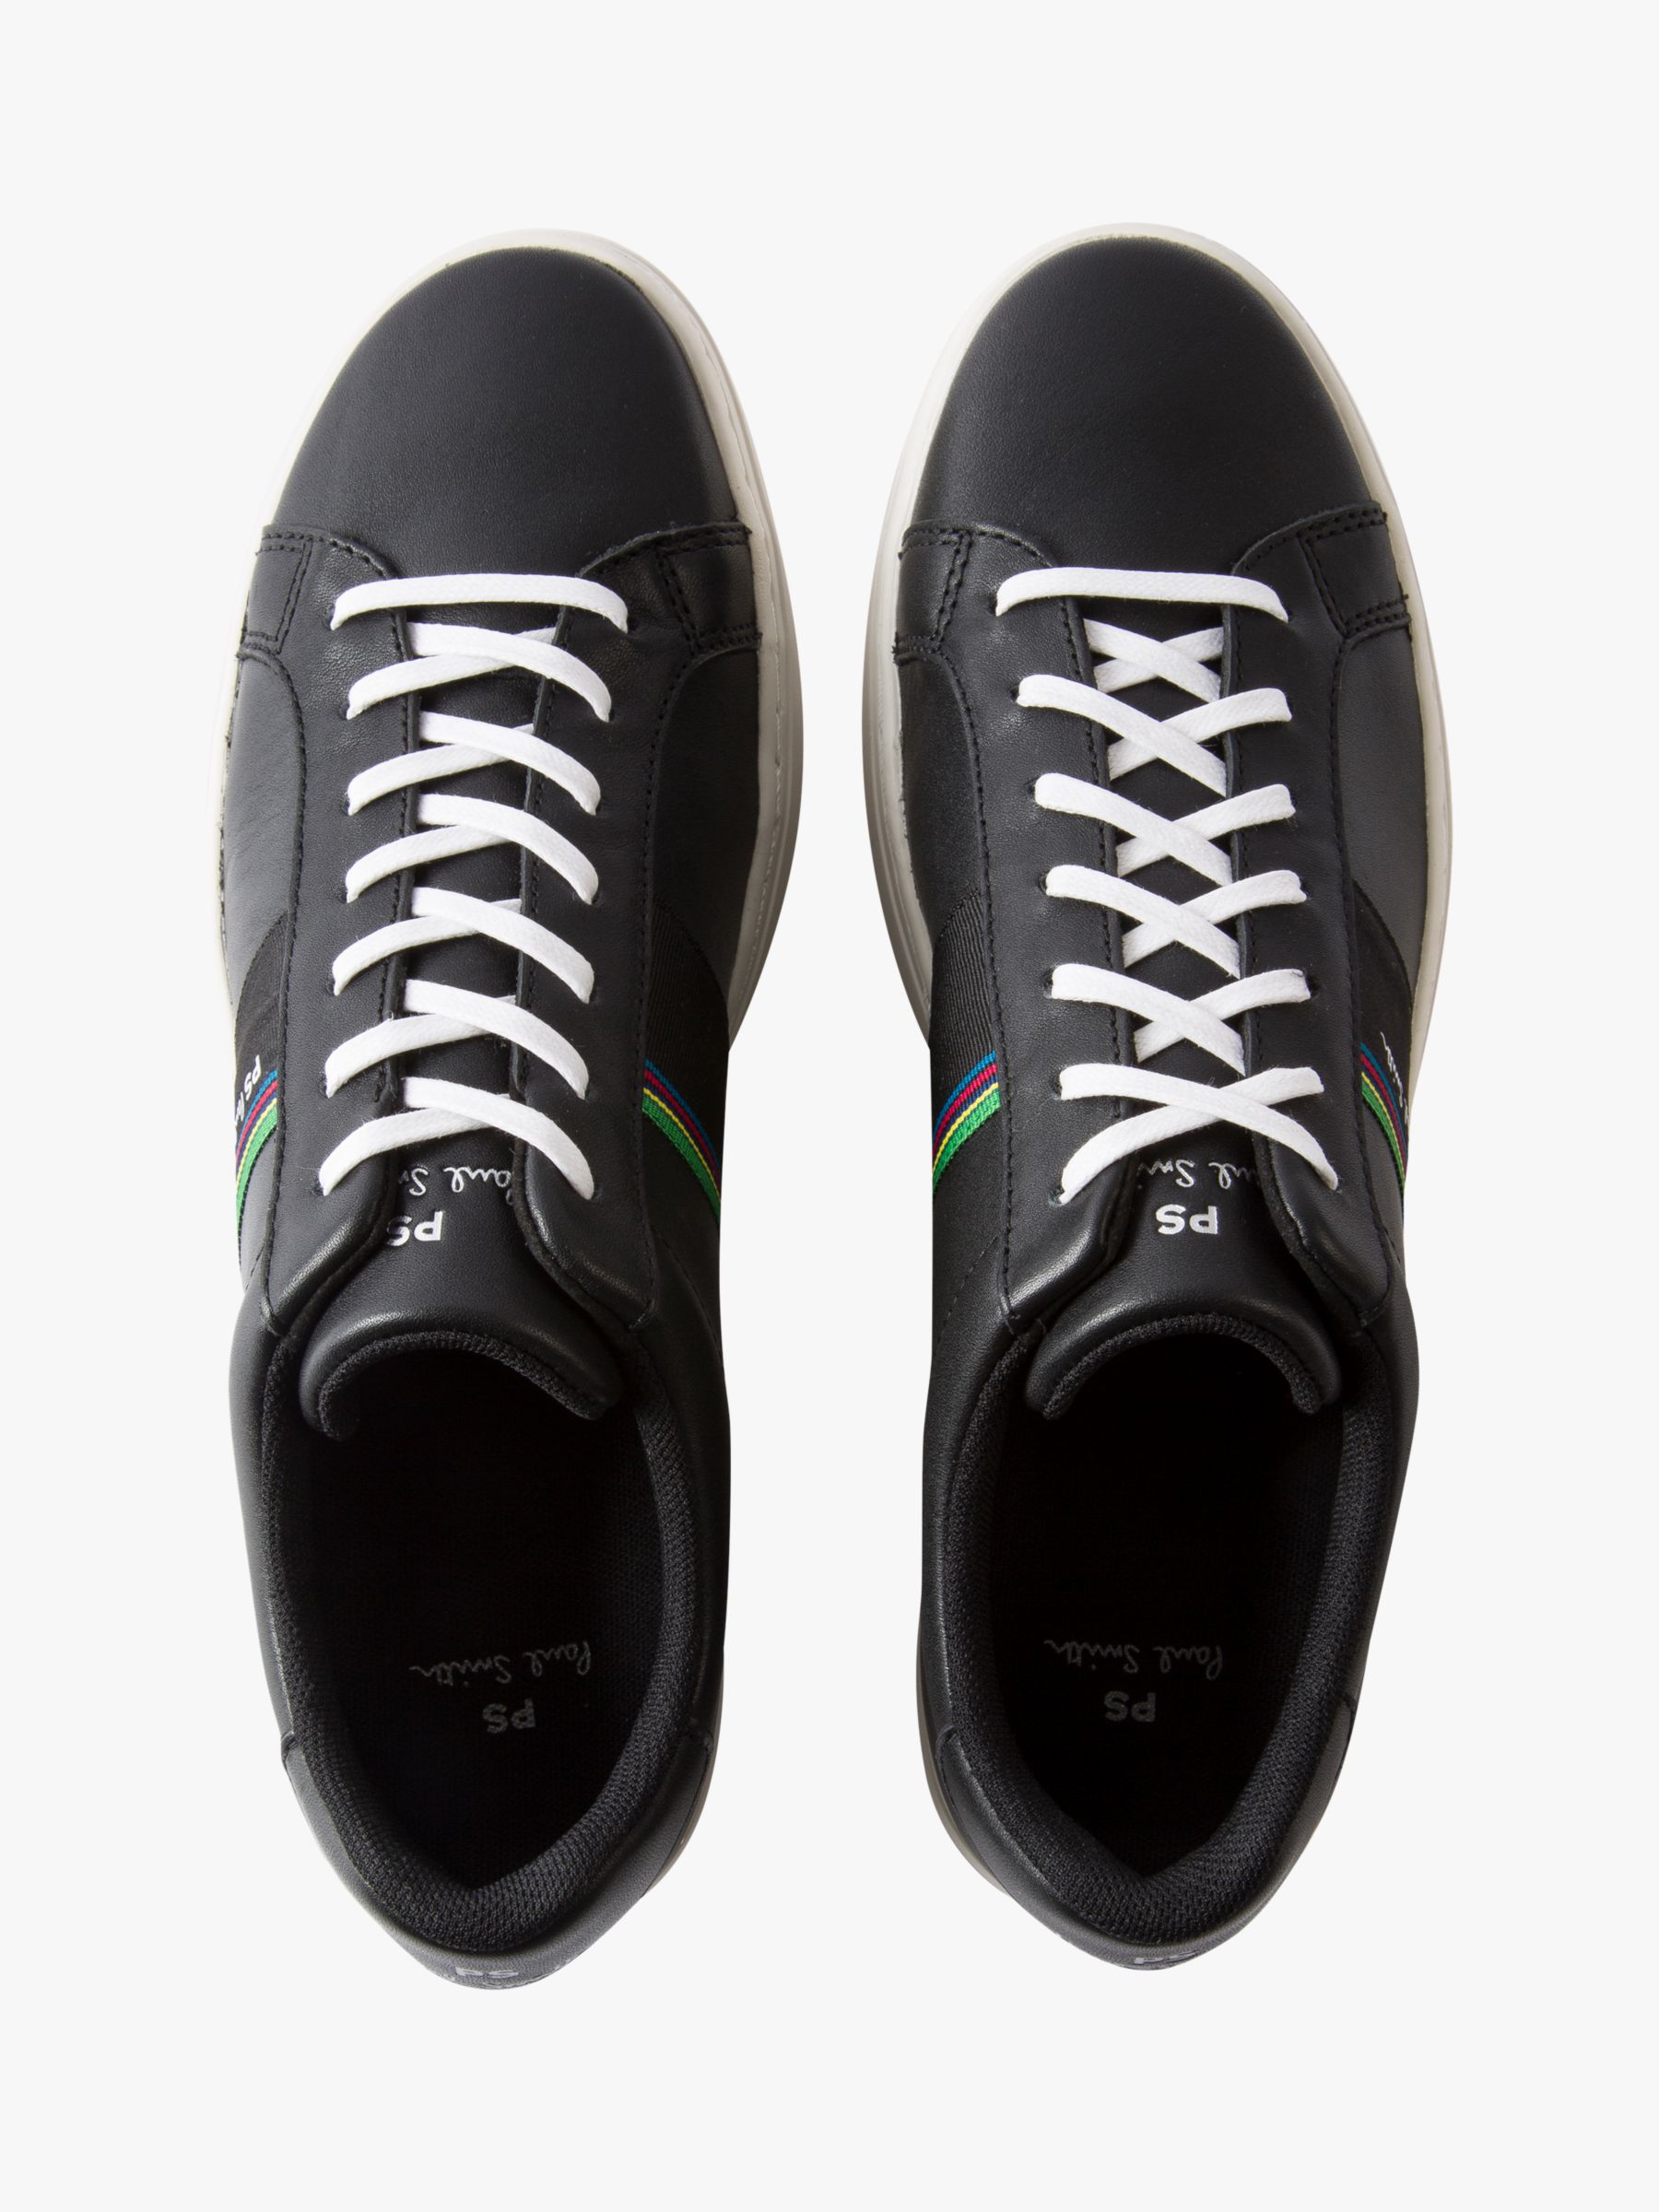 PS Paul Smith Rex Leather Trainers at John Lewis & Partners